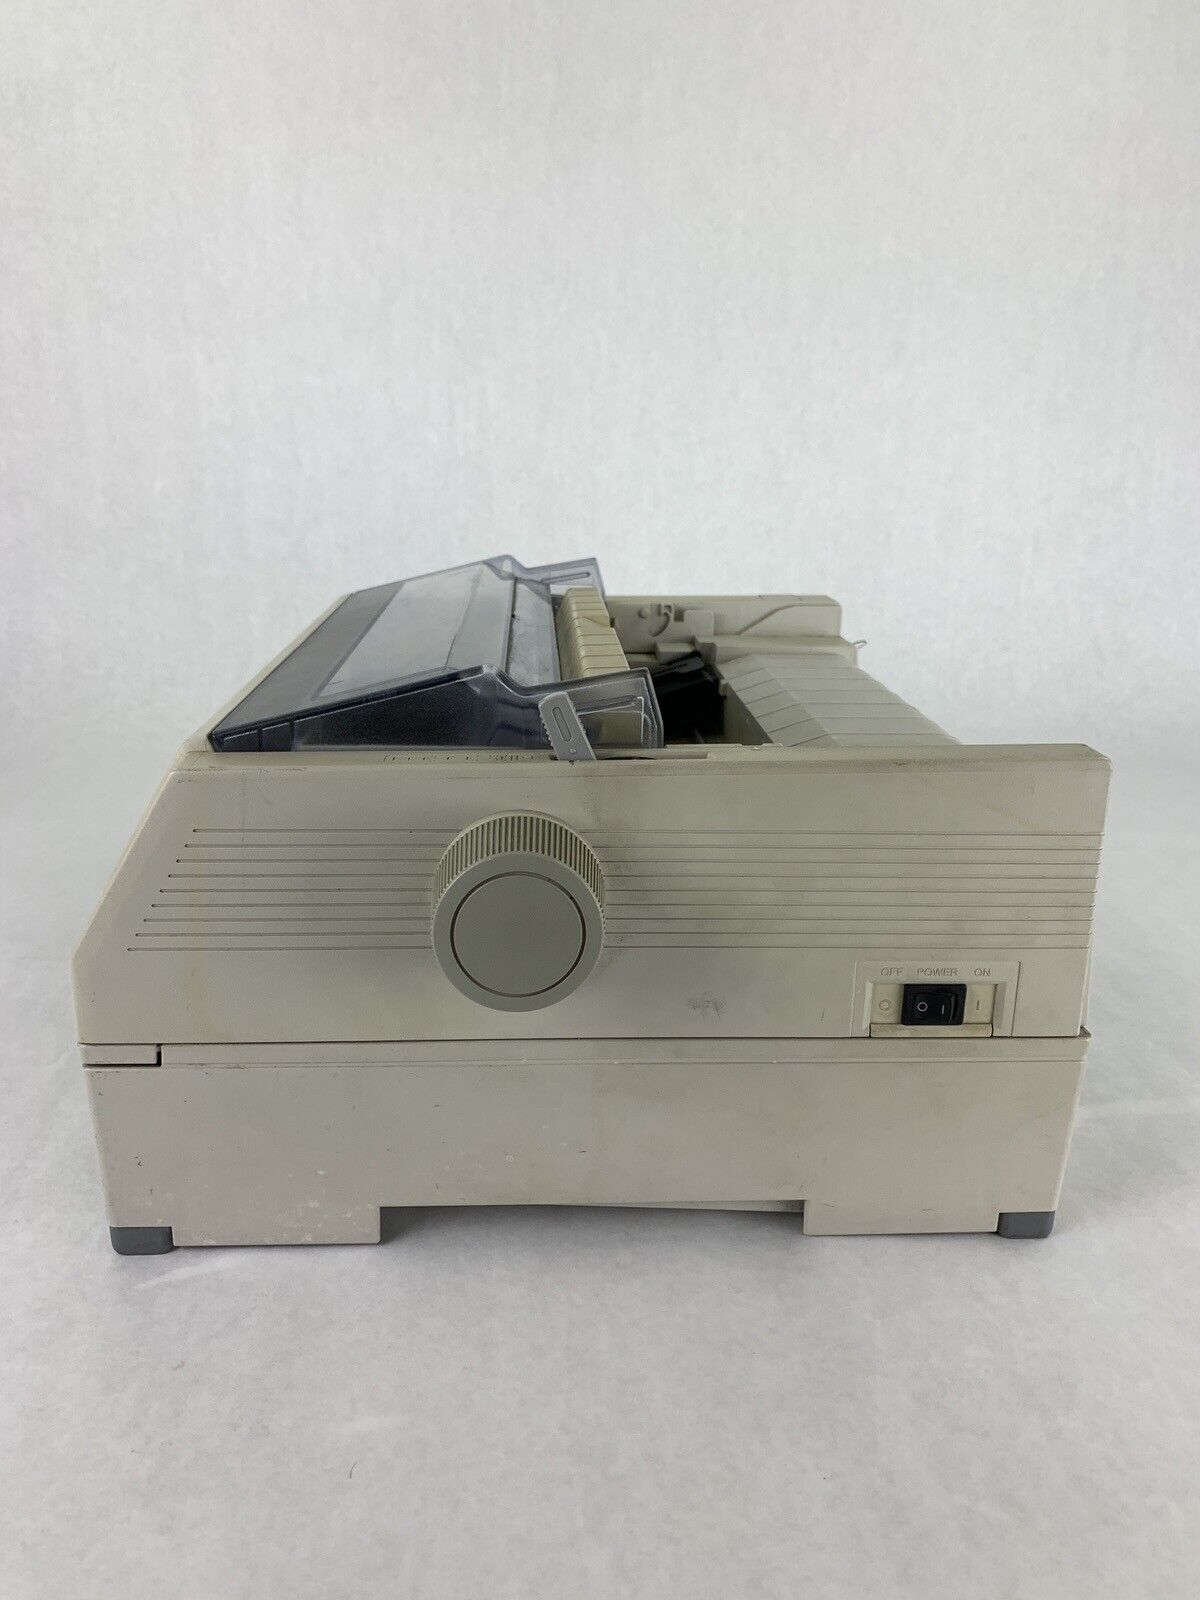 Oki 320 Turbo Printer GE7000A For Parts and Repair Self Tested